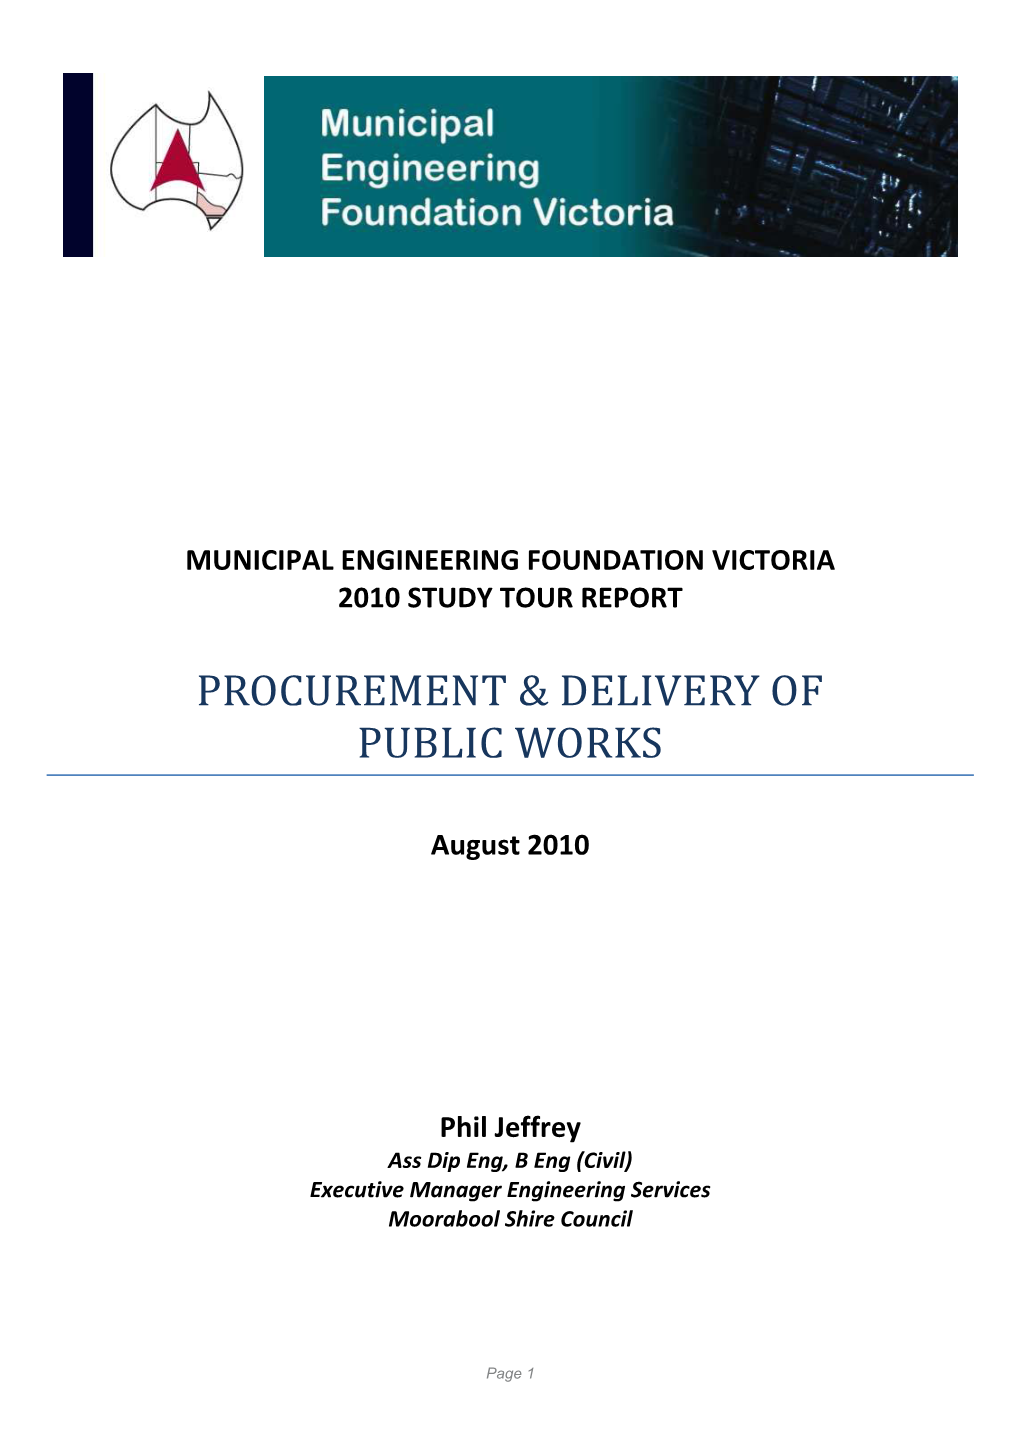 Procurement & Delivery of Public Works